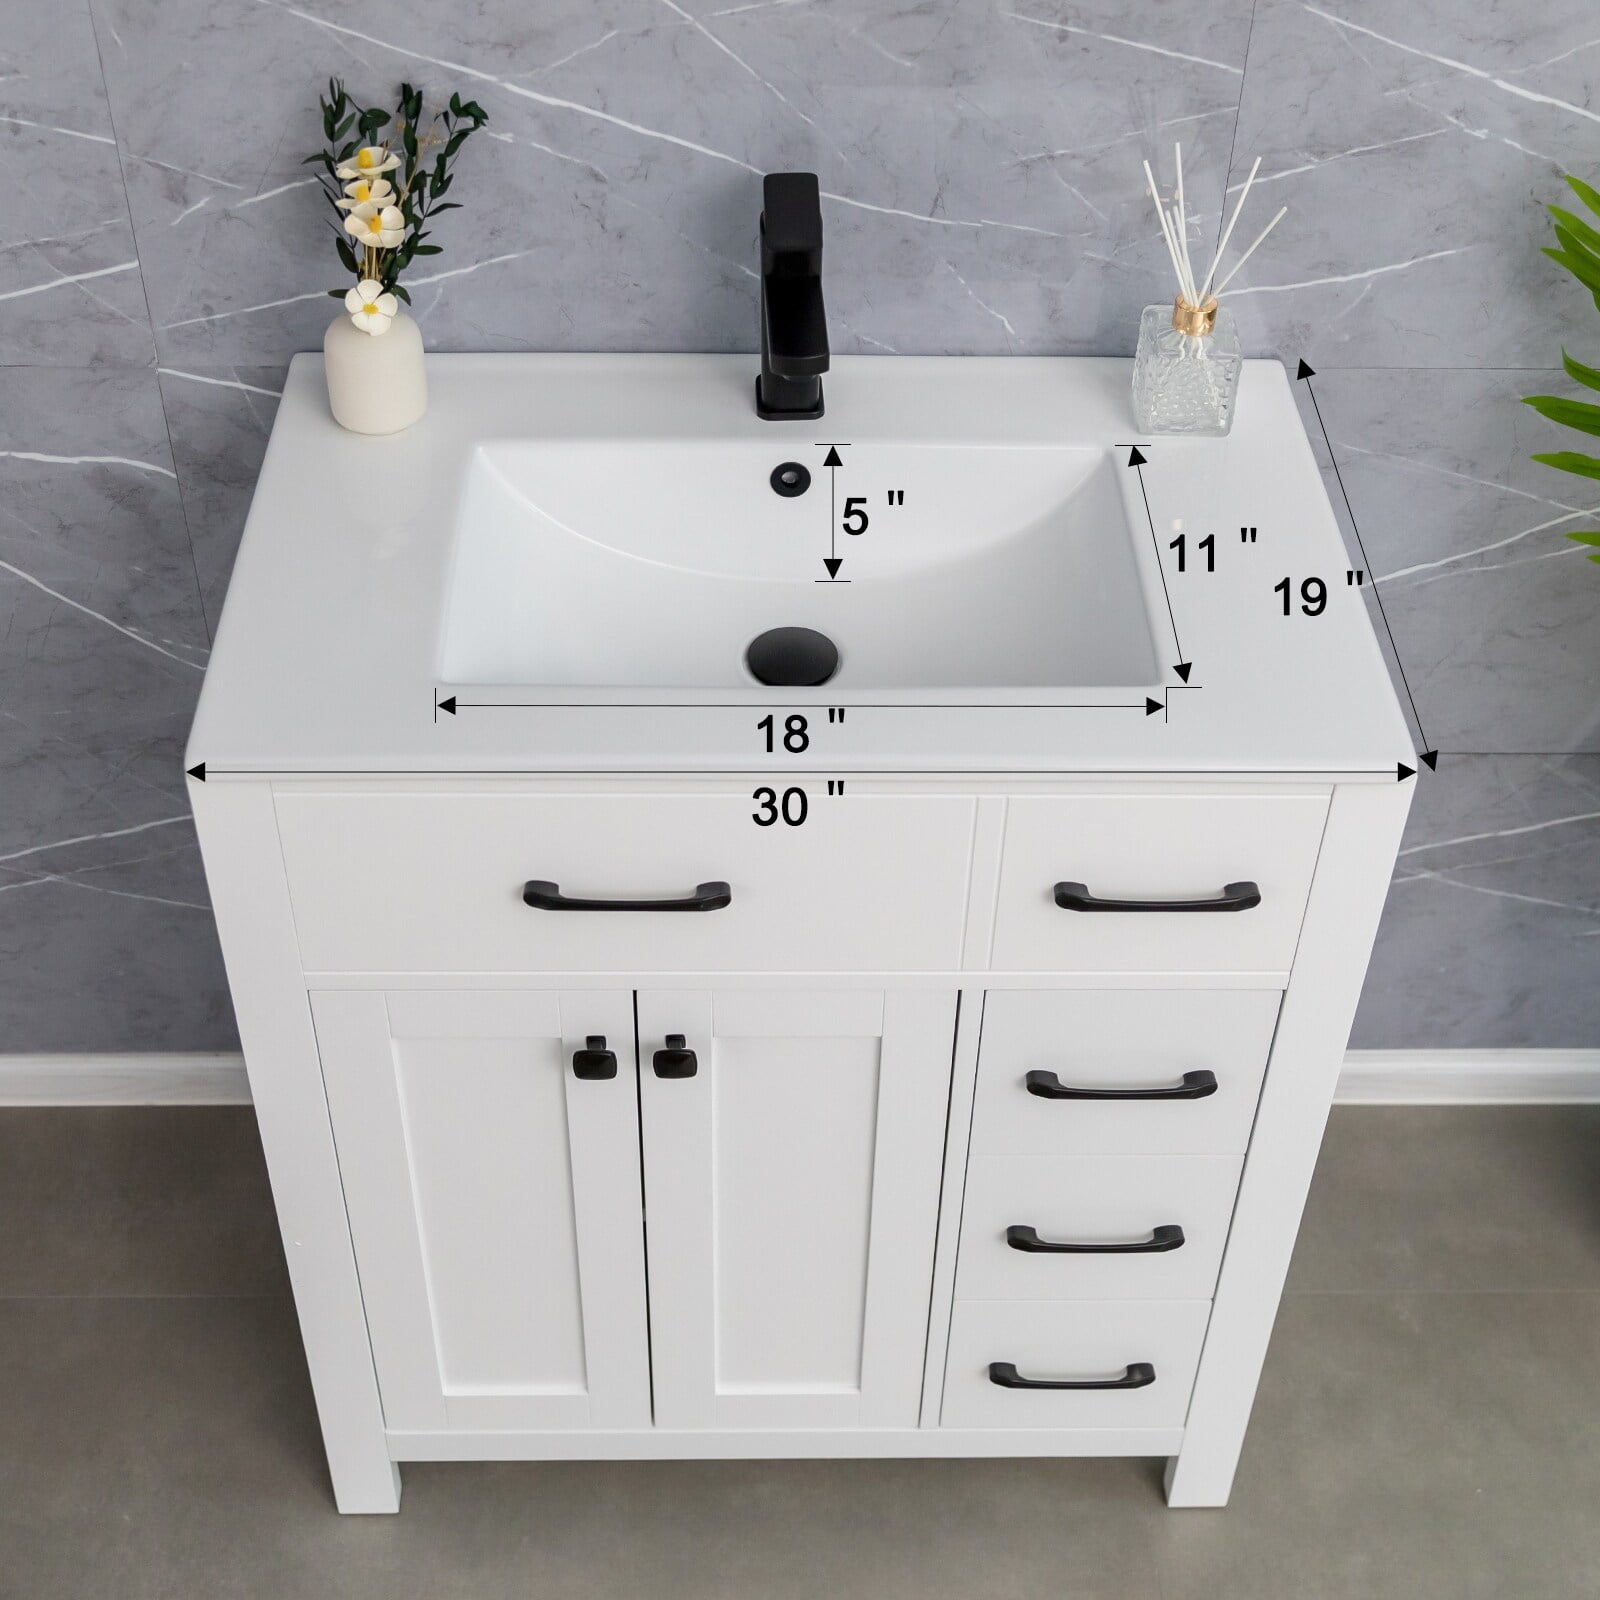 Eclife 36 Bathroom Vanities Cabinet with Sink Combo Set,Matte Black  Faucet,Undermount Ceramic Sink with Thickened Wood